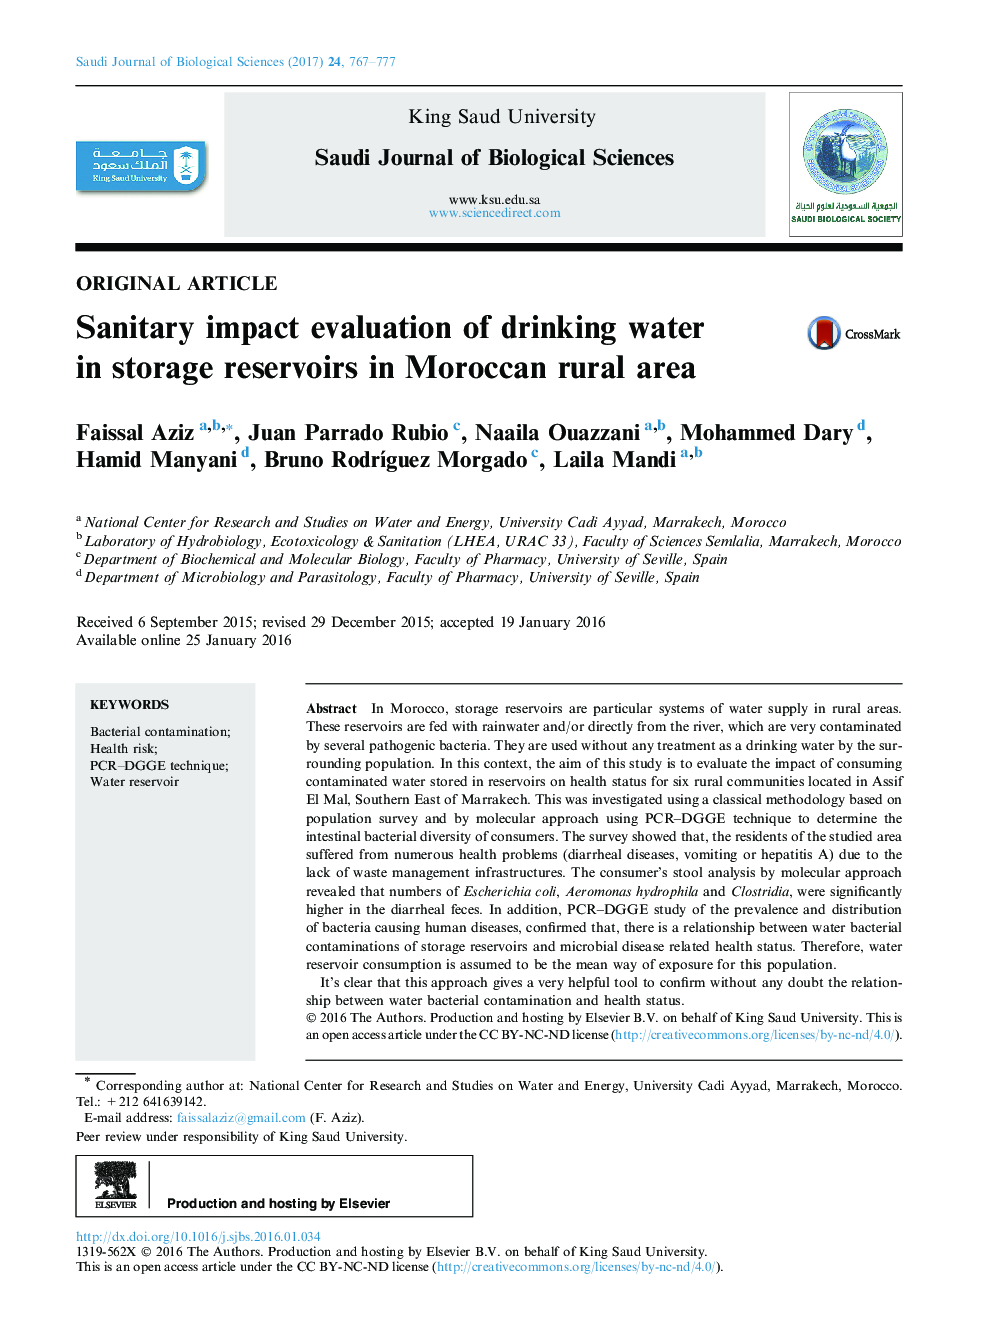 Original articleSanitary impact evaluation of drinking water in storage reservoirs in Moroccan rural area